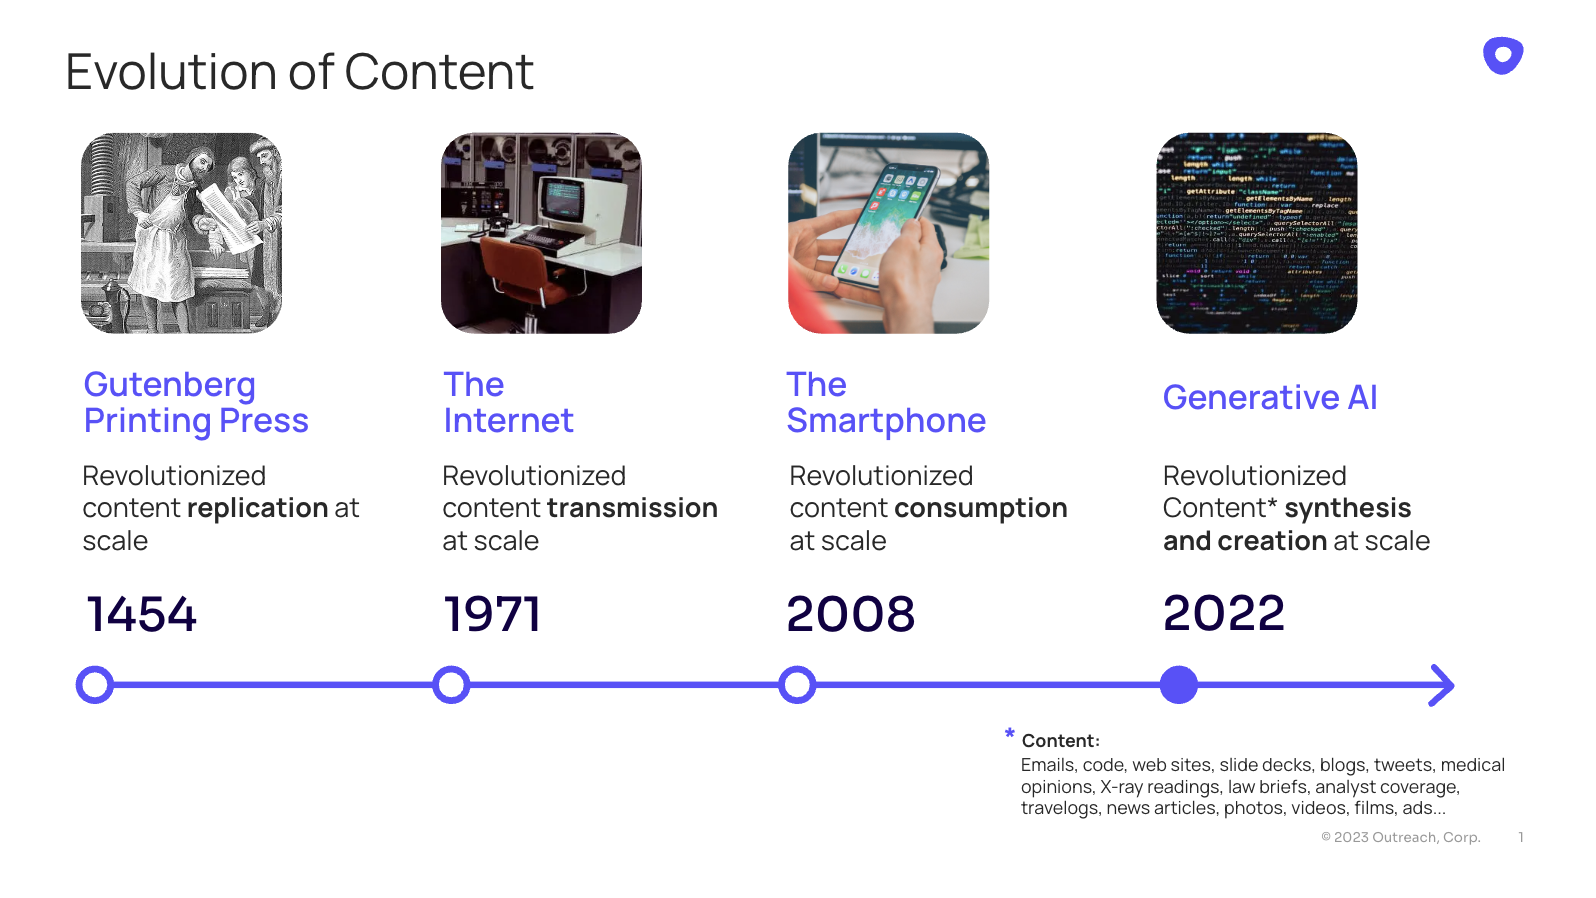 Evolution of content being displayed to show how Generative AI is transforming content creation and synthesis